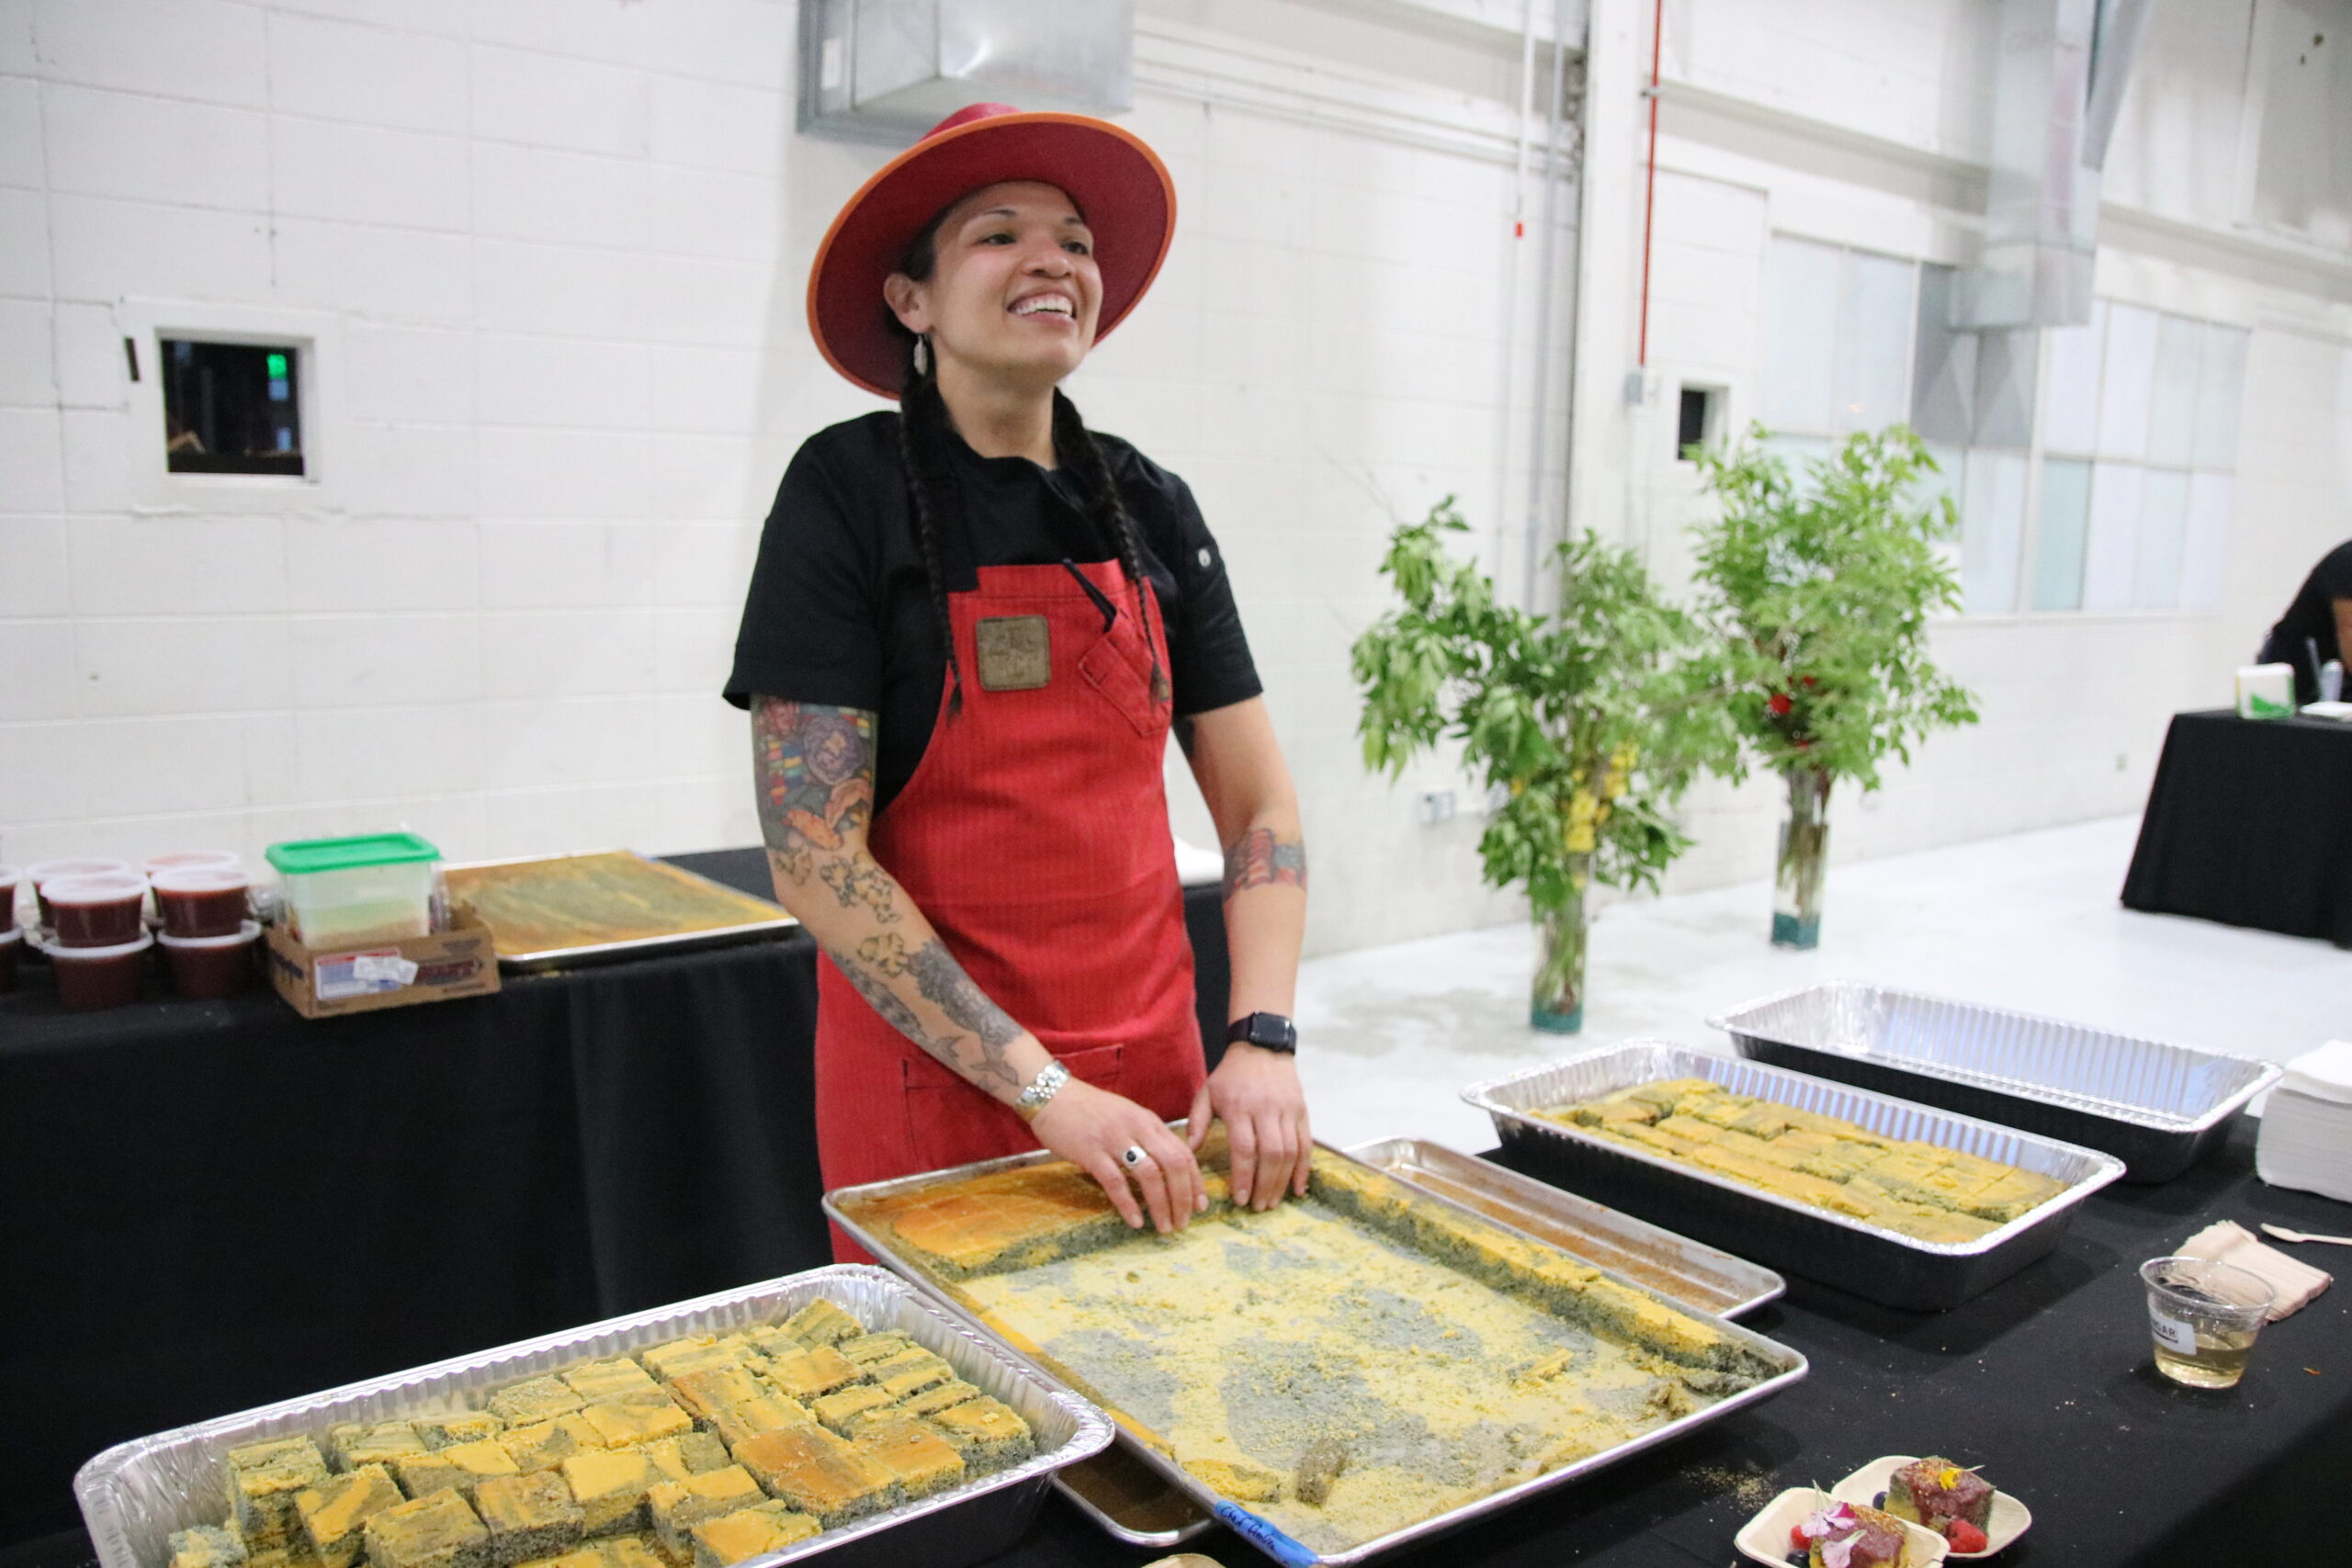 Emma VandenEinde
/
KUNC
Andean Chef Andrea Murdoch stands in front of her Ute Mountain Ute Blue Cornmeal Swirl cake at the Denver EATSS event at Stanley Marketplace in Aurora, Colo., on June 14, 2023. She's one of the five Indigenous chefs that were picked to share a meal with guests.